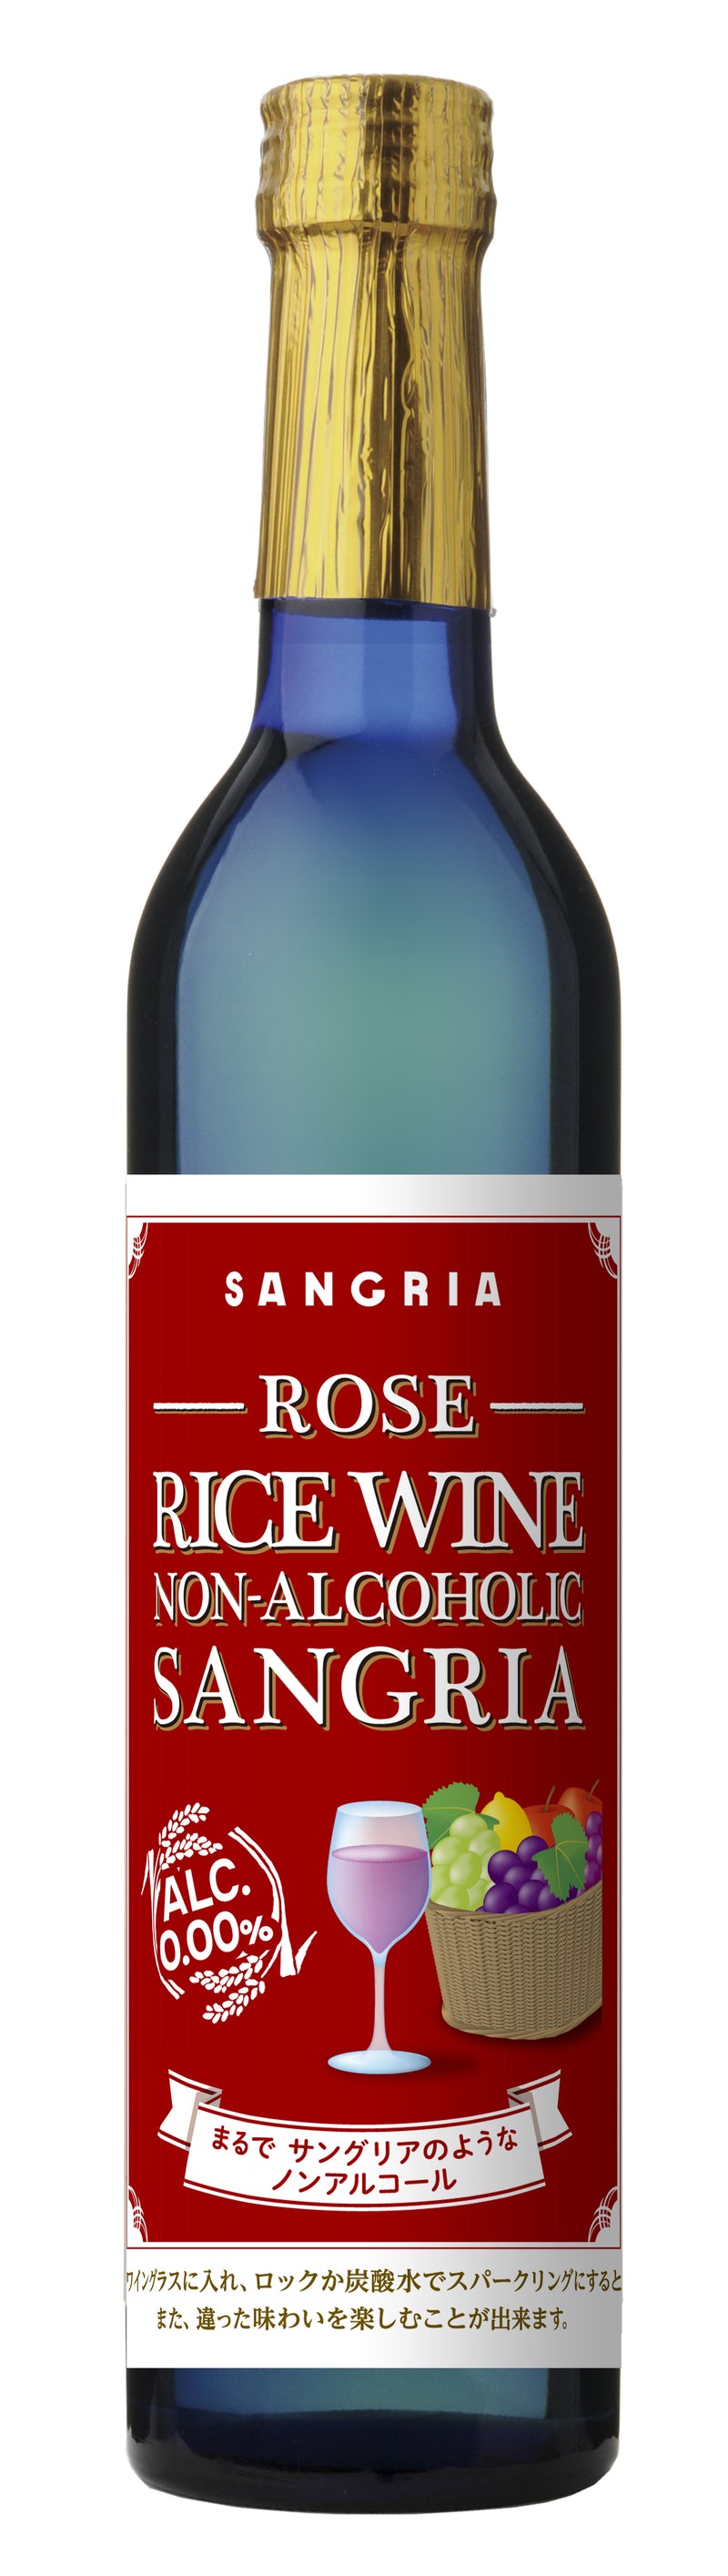 Sangria Japanese Style and Taste (rice wine non-alcoholic sangria) Made in Japan - Kawasaki City Store